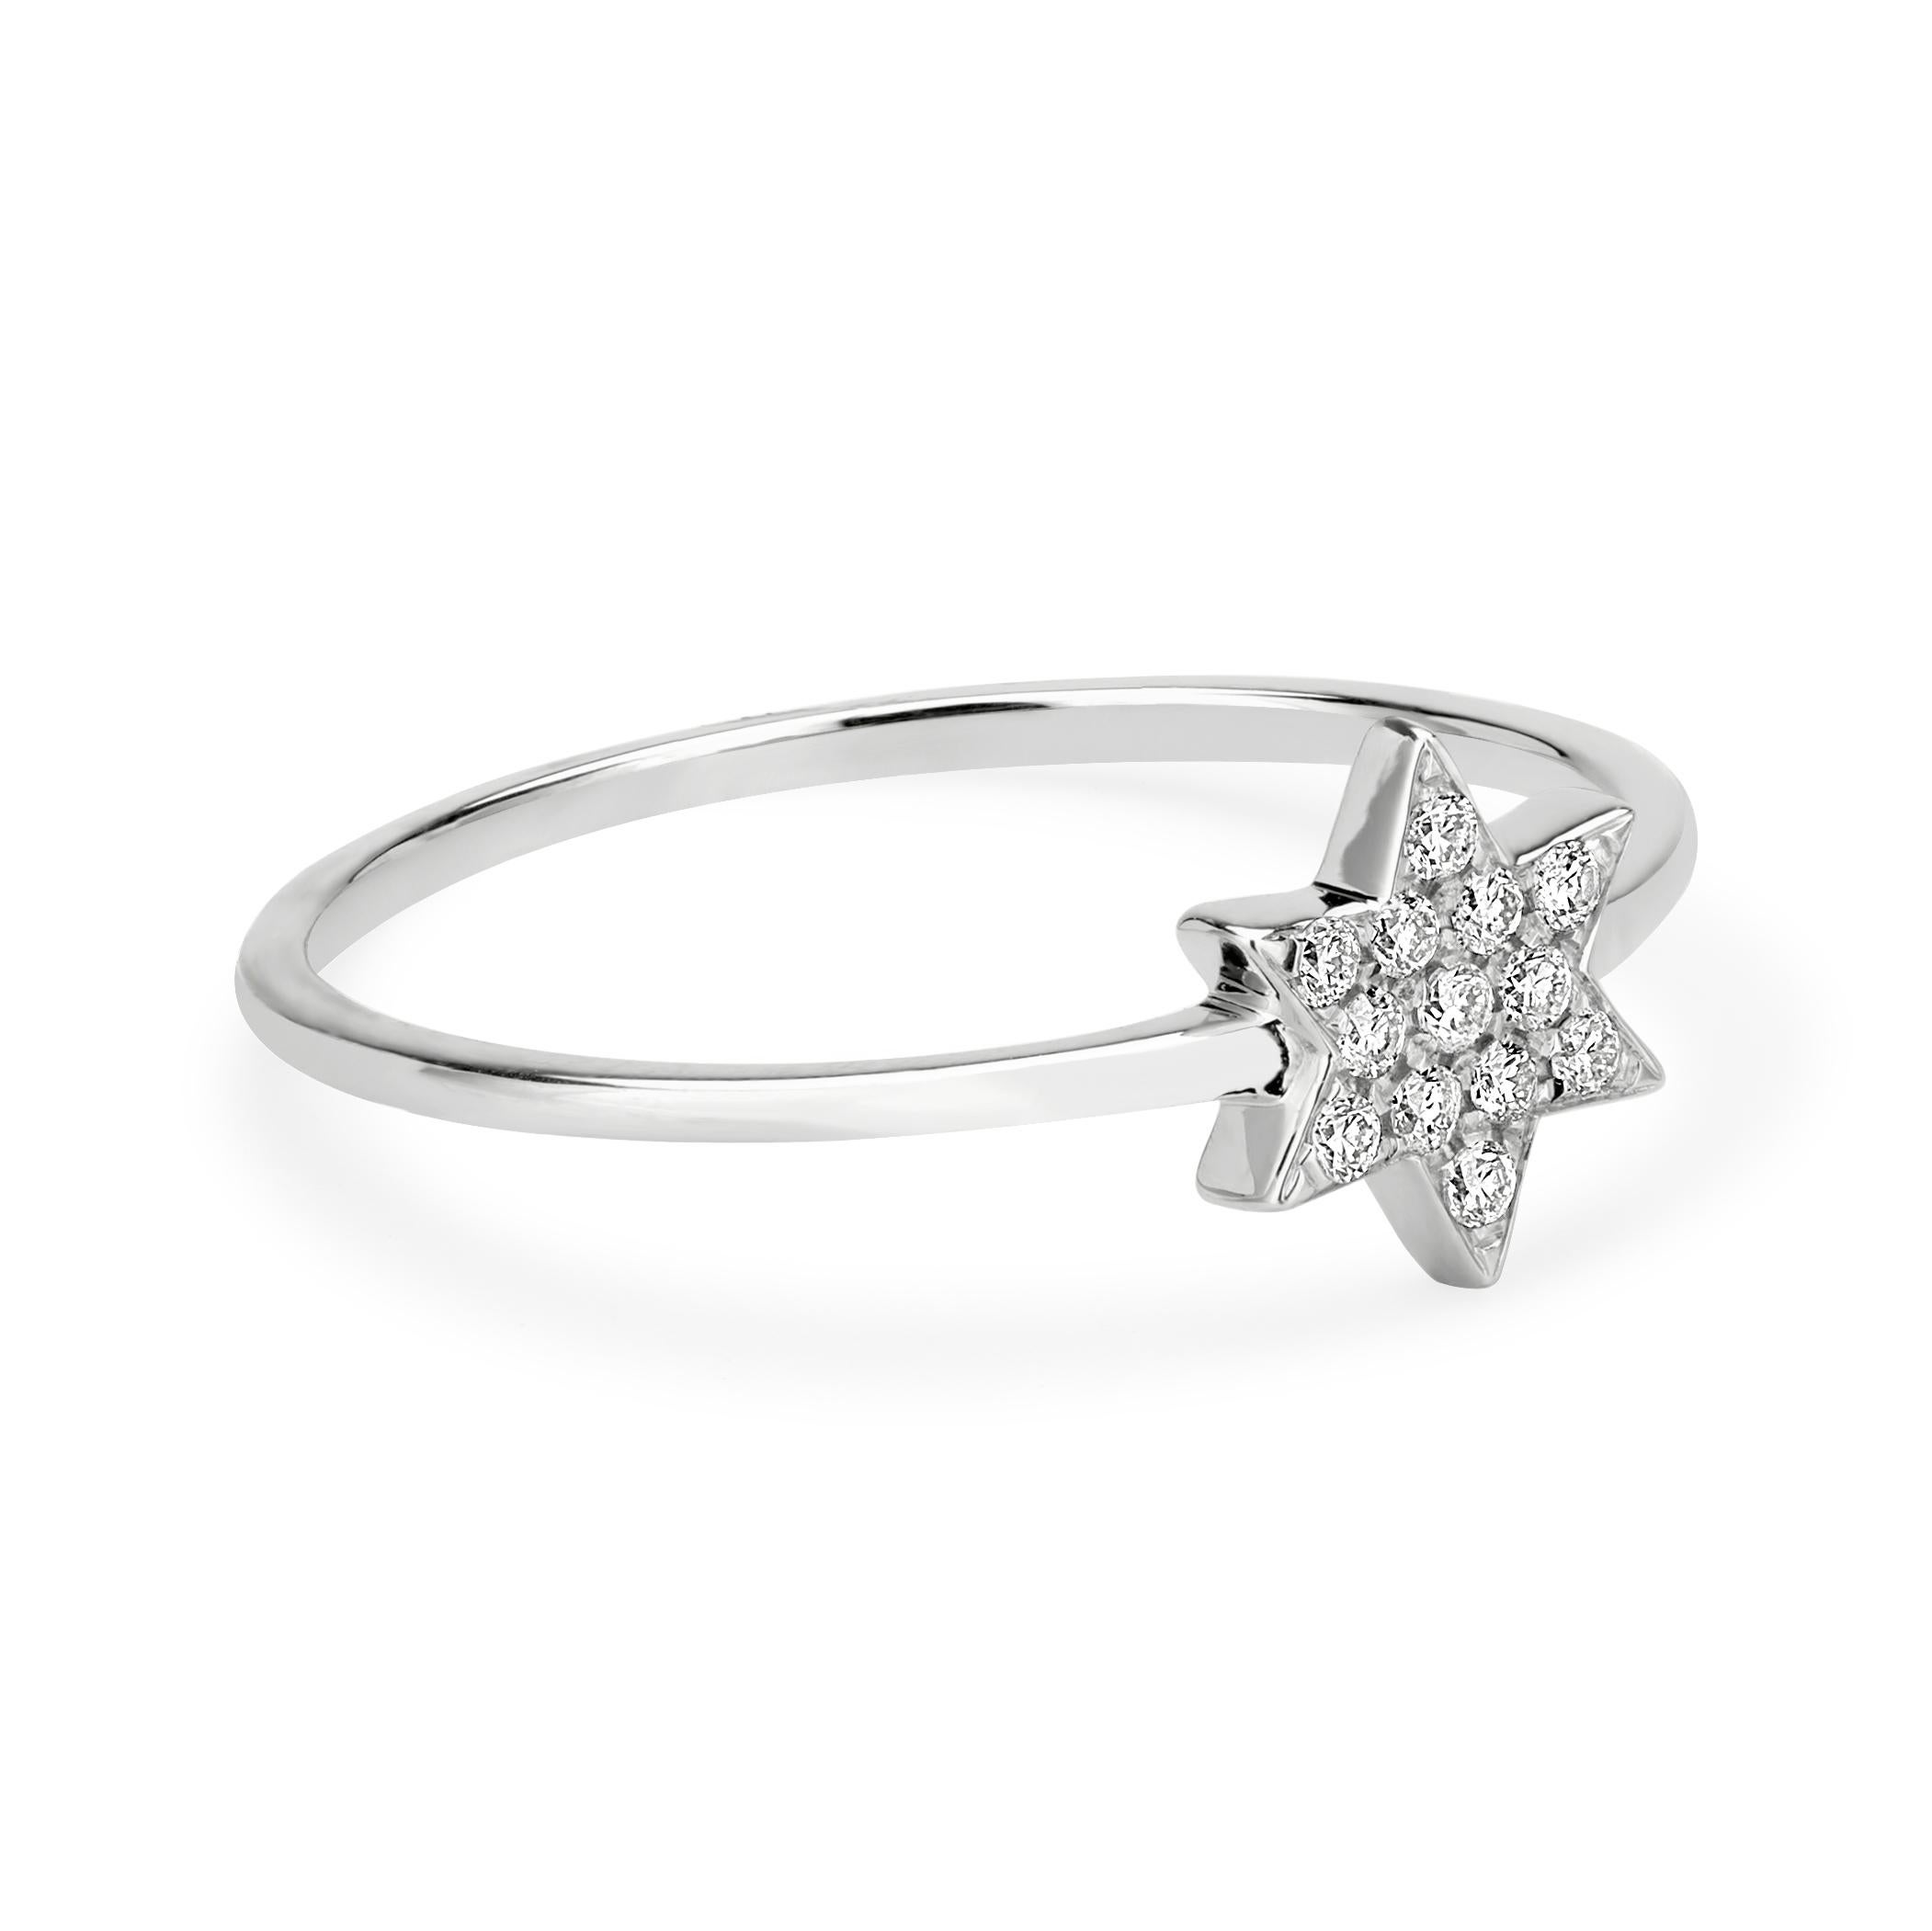 Grace your finger with a Luxle star-ring a representative of guidance, leading the direction you were meant to go. Subtle yet pretty this star-ring is the new fashion statement. It is featured with 13 round-cut diamonds, totaling 0.10Cts pave set in